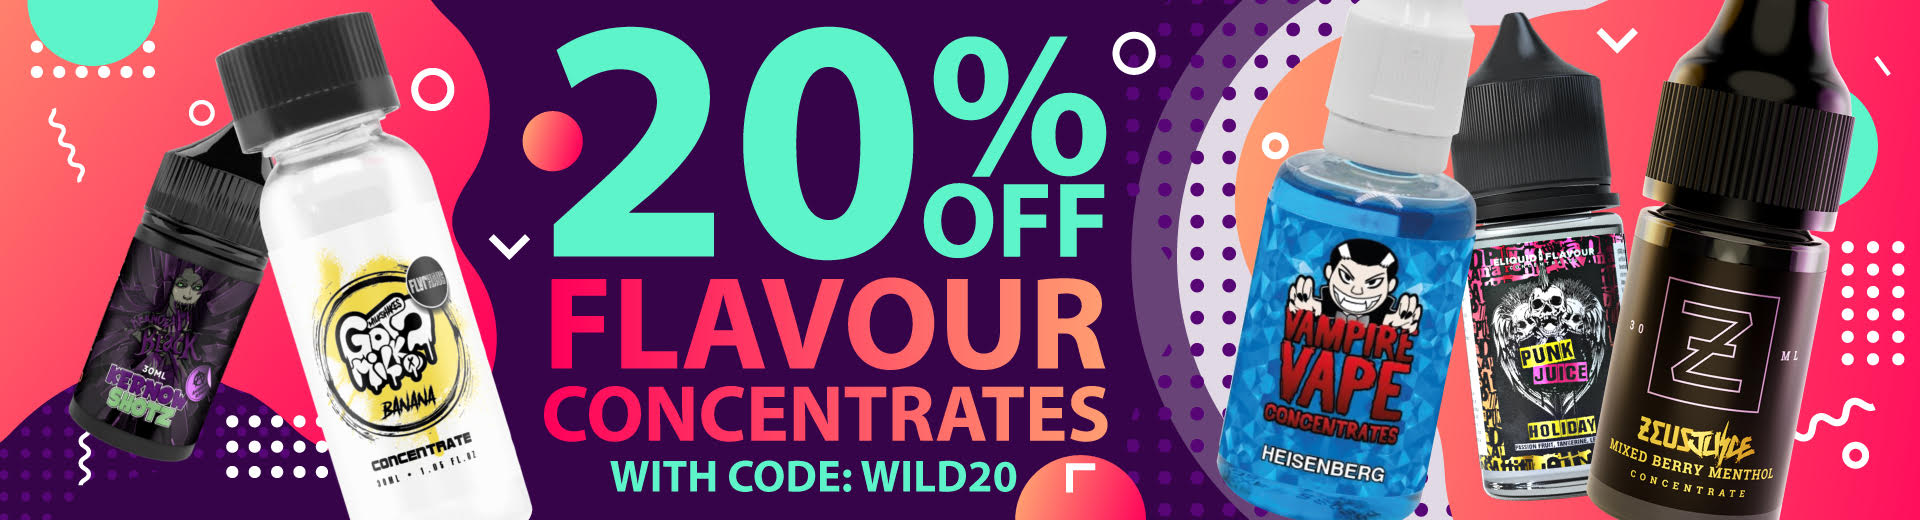 20% OFF FLAVOUR CONCENTRATES